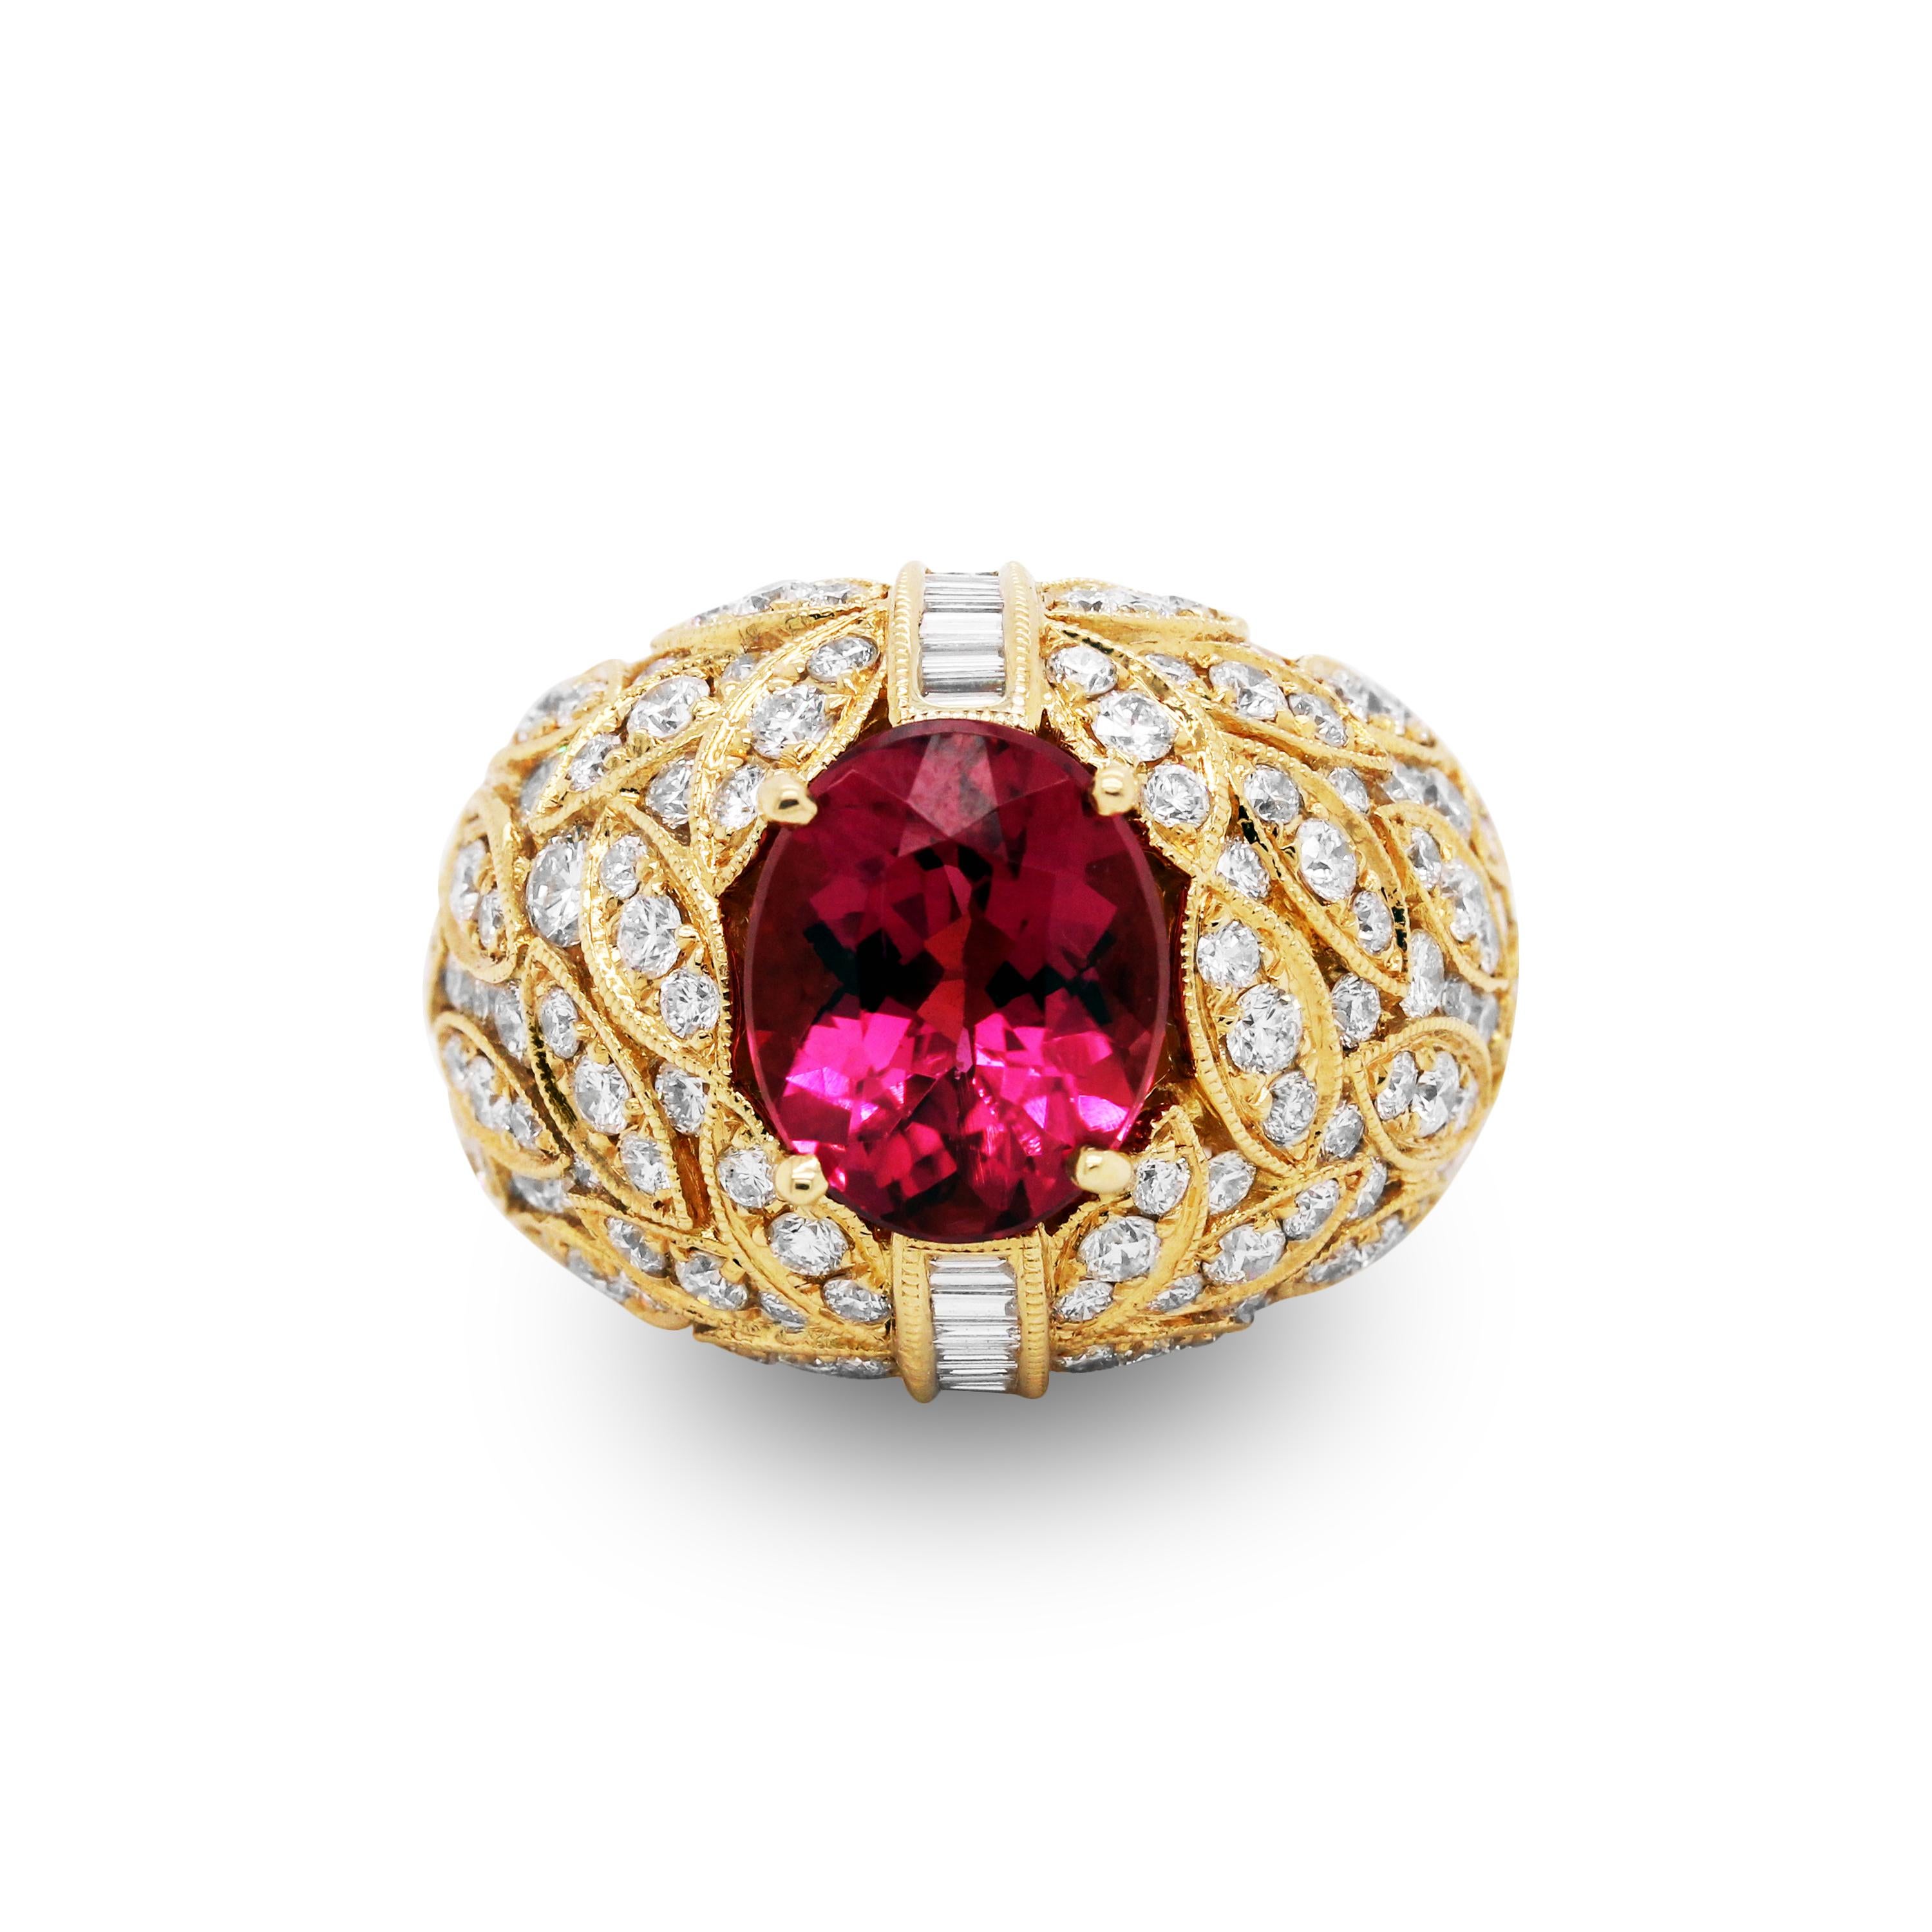 Oval Cut Yellow Gold and Diamond Ring with Rubellite Tourmaline Center